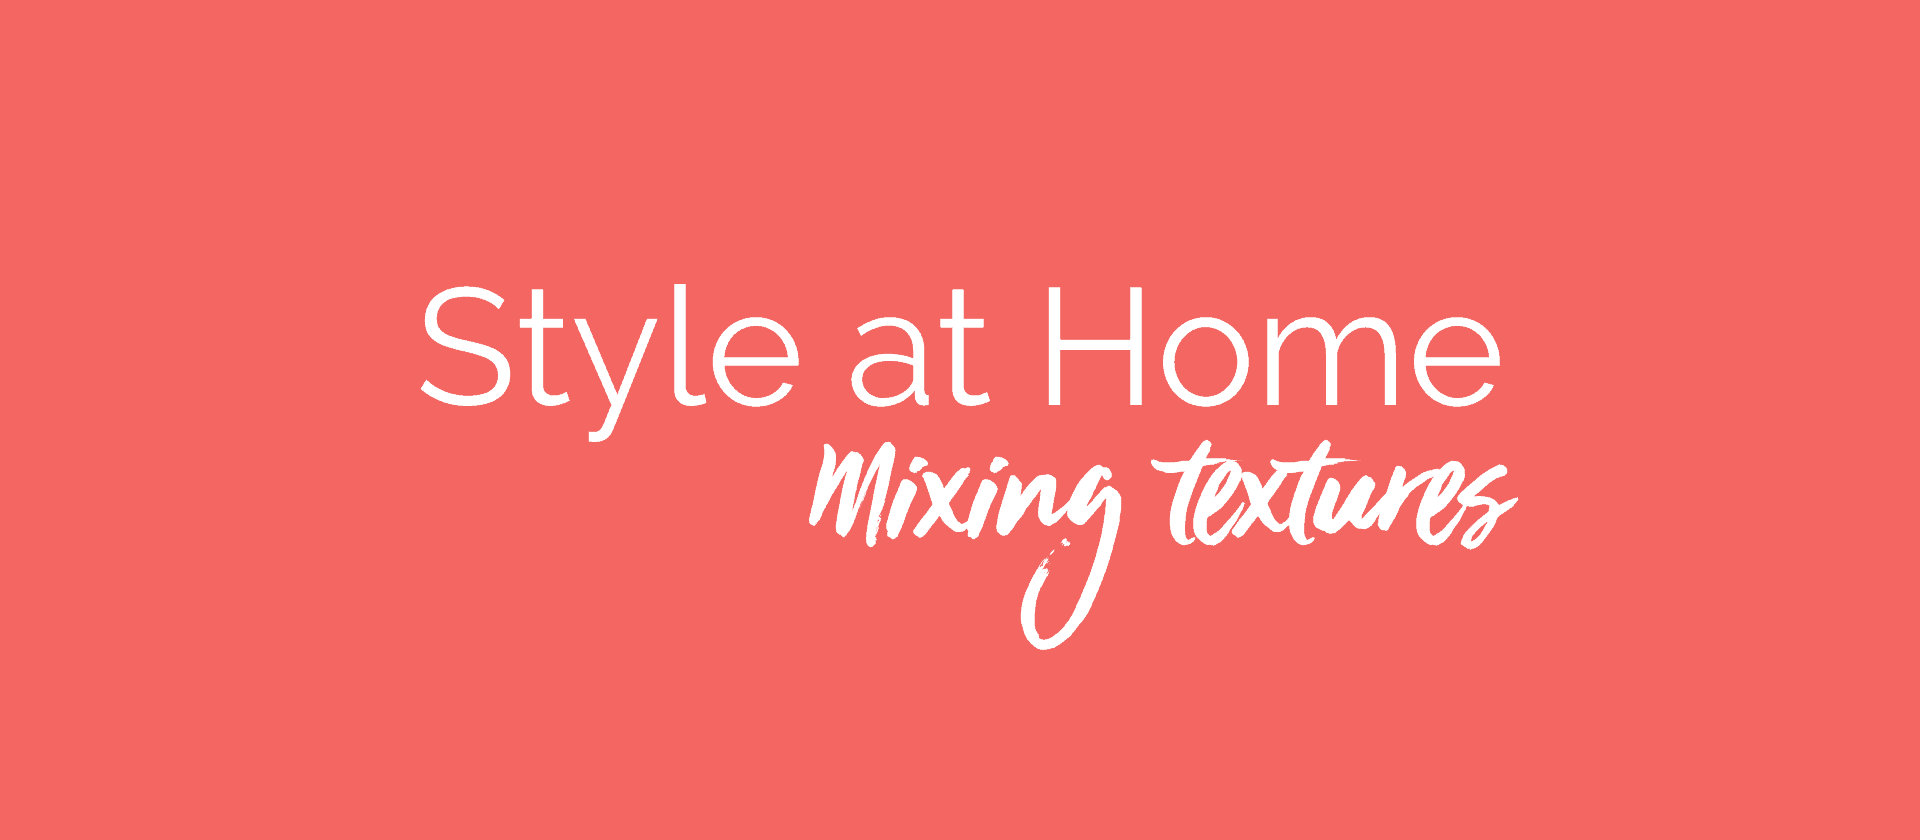 Mixing Textures - Style at home banner